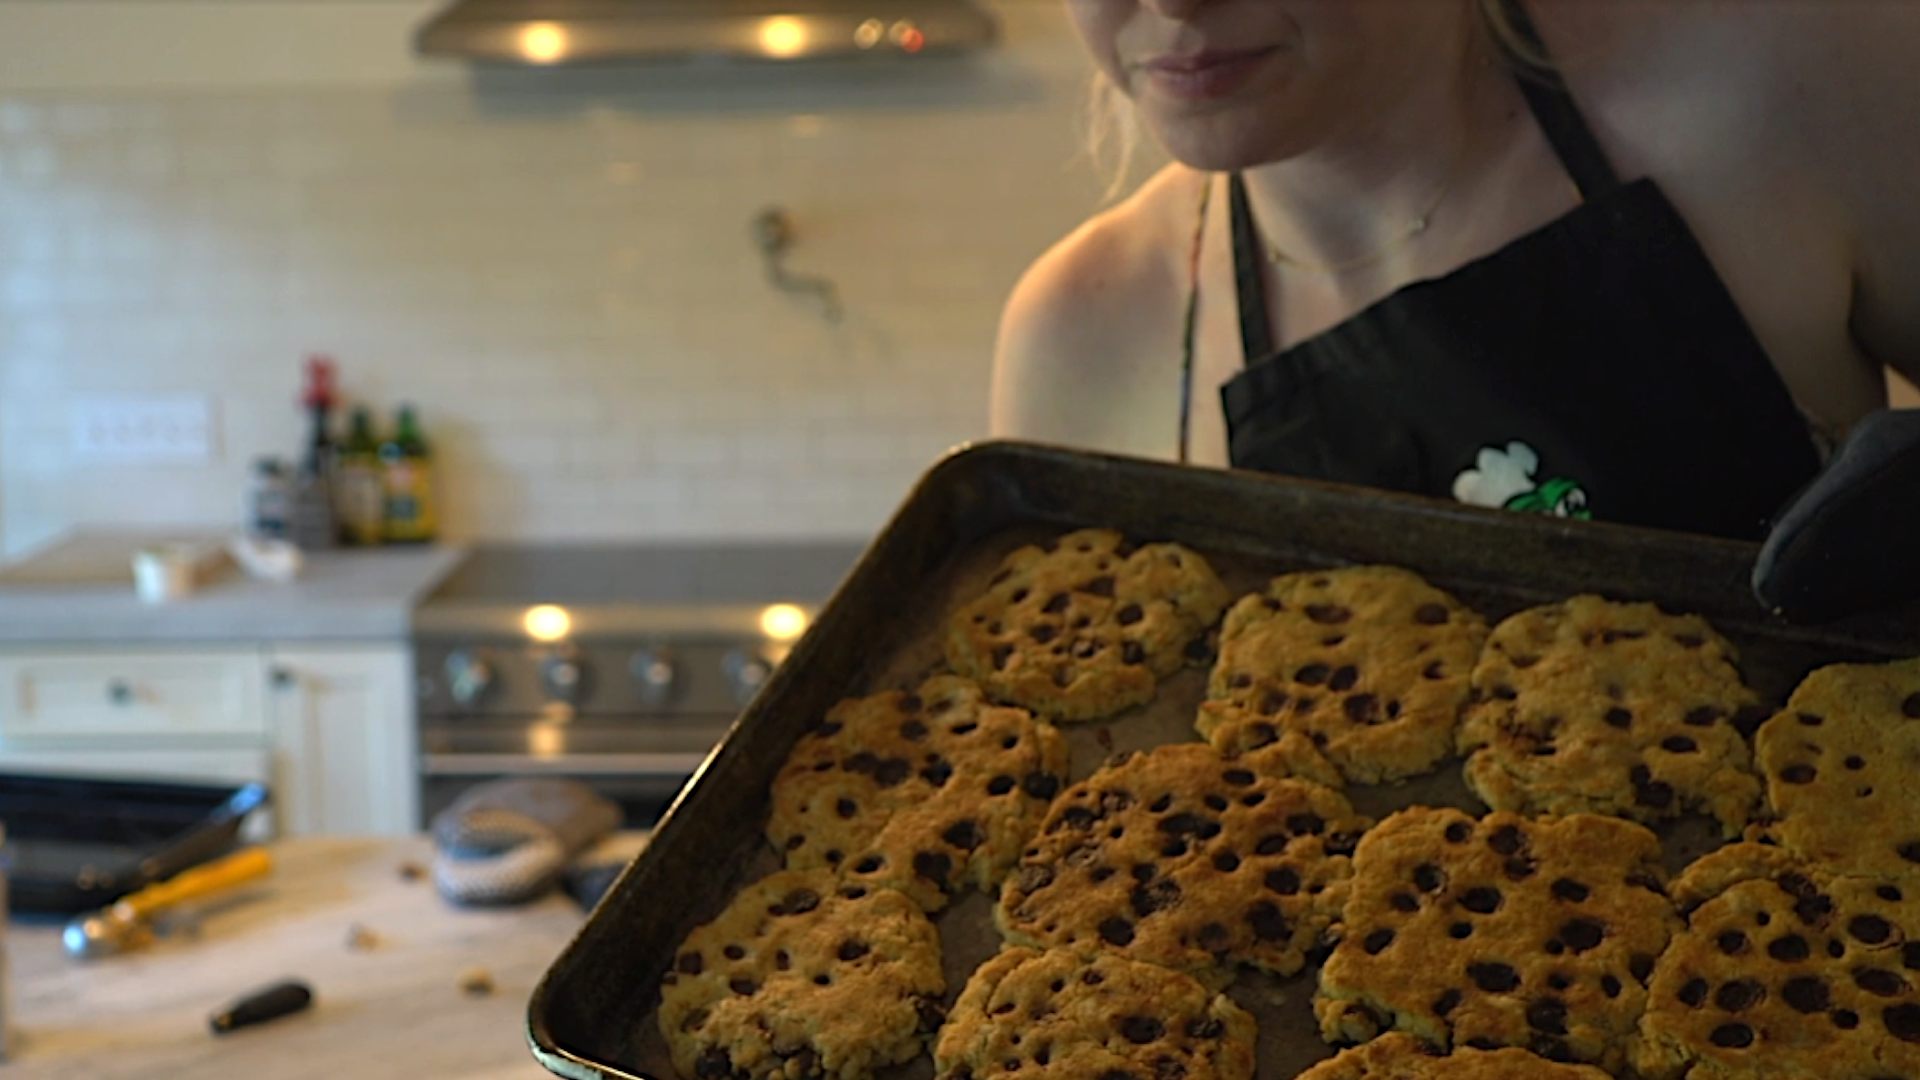 ‘They are afraid of me’: Mastermind speedrunner bends the rules of a meme contest and bakes 12 actual cookies in under 4 minutes, forces site mods to make a whole new category